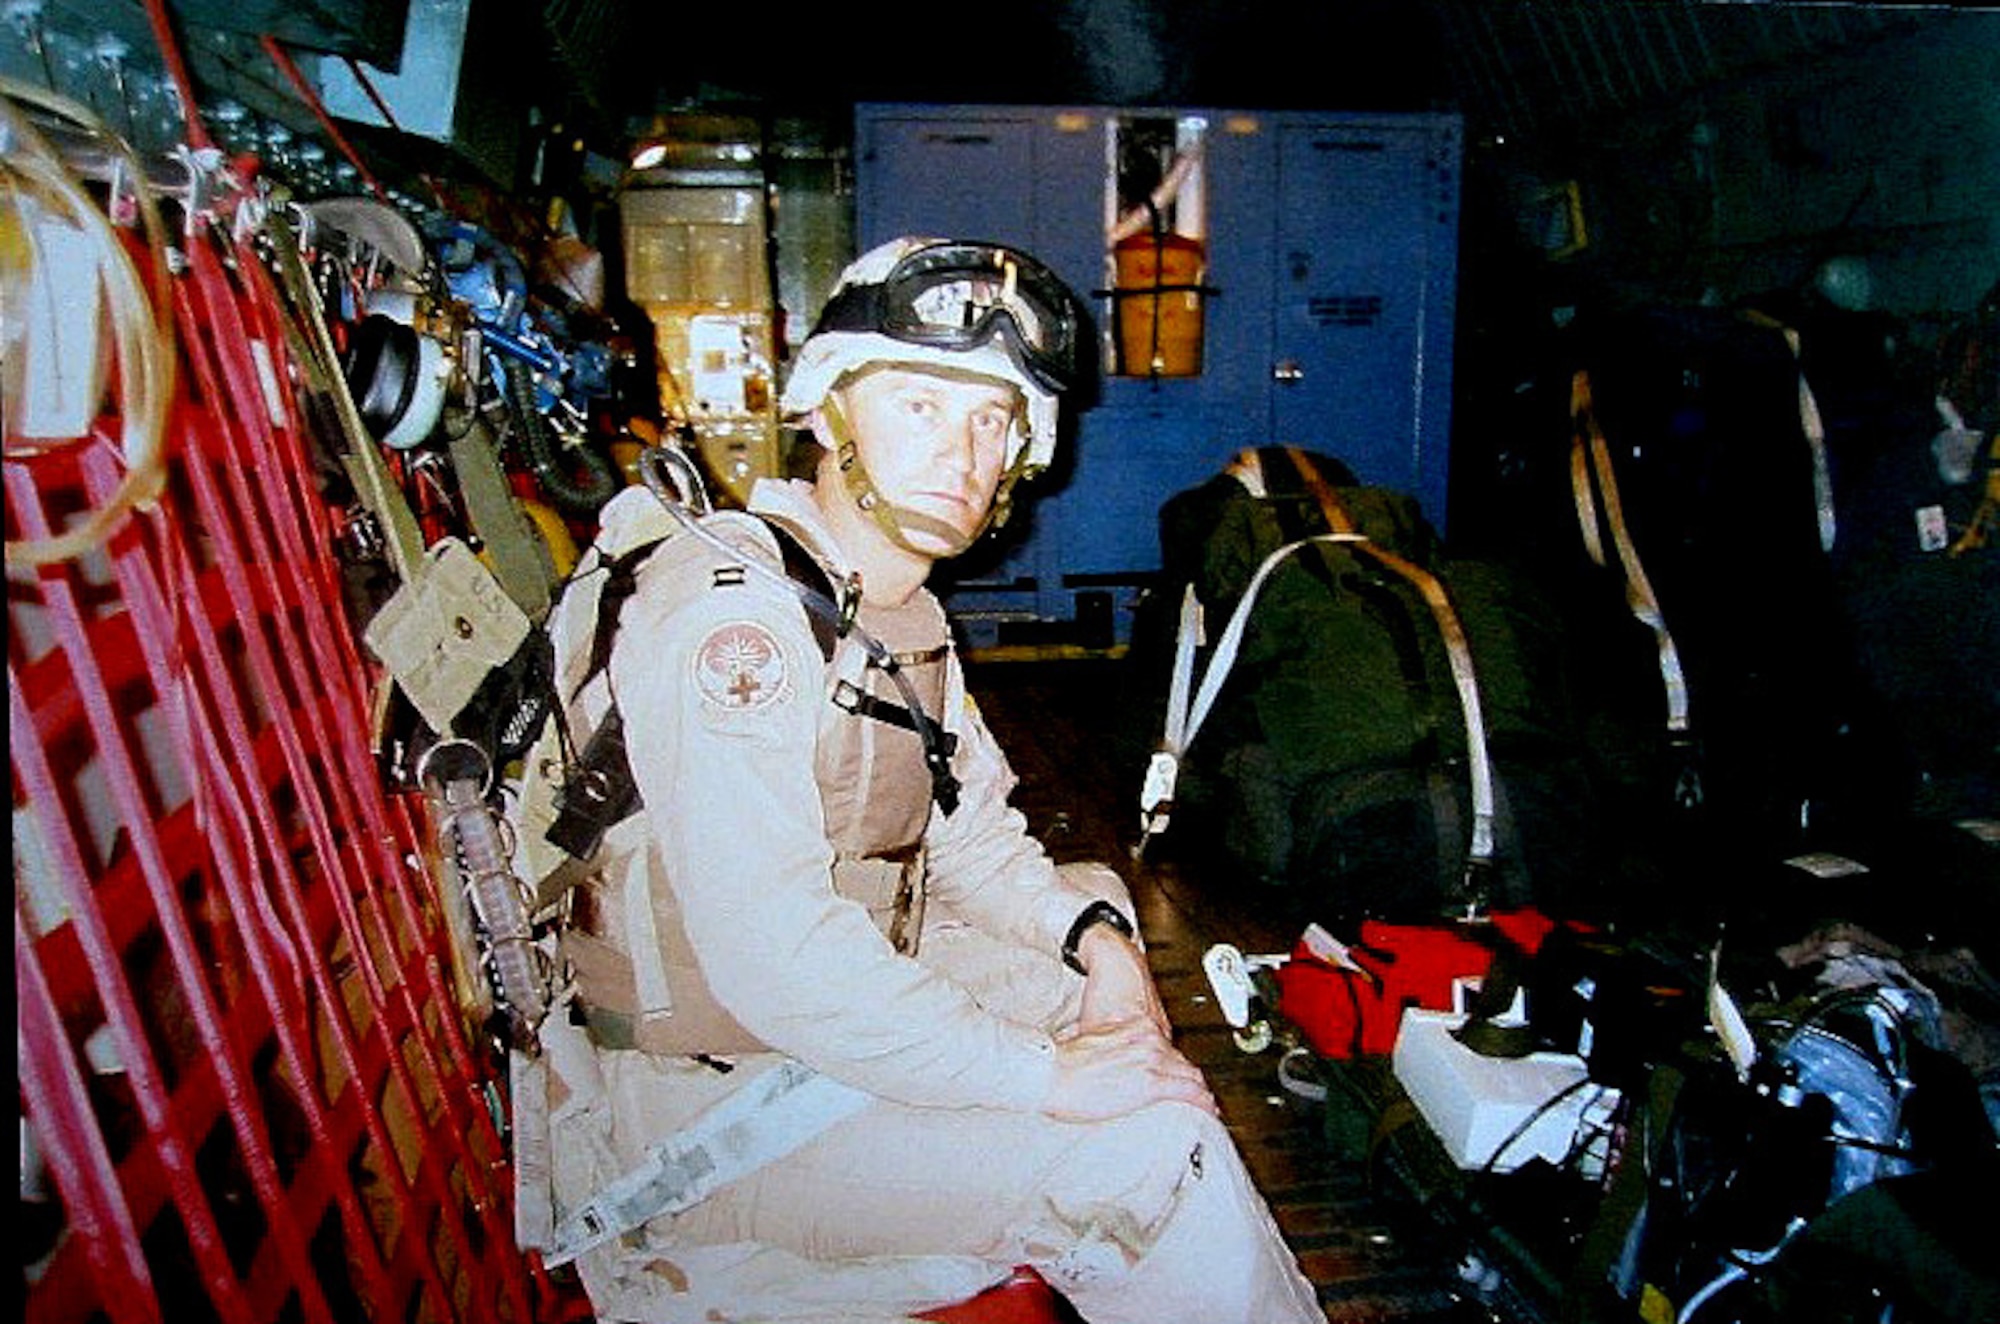 While assigned to the 446th Aeromedical Evacuation Squadron here as a flight nurse, now retired Capt. Ed Hrivnak deployed in 2003 to Southwest Asia, and developed post-tramatic stress after his return. He has written two books about his experience and speaks to a variety of audiences about PTSD. (U.S. Air Force file photo)